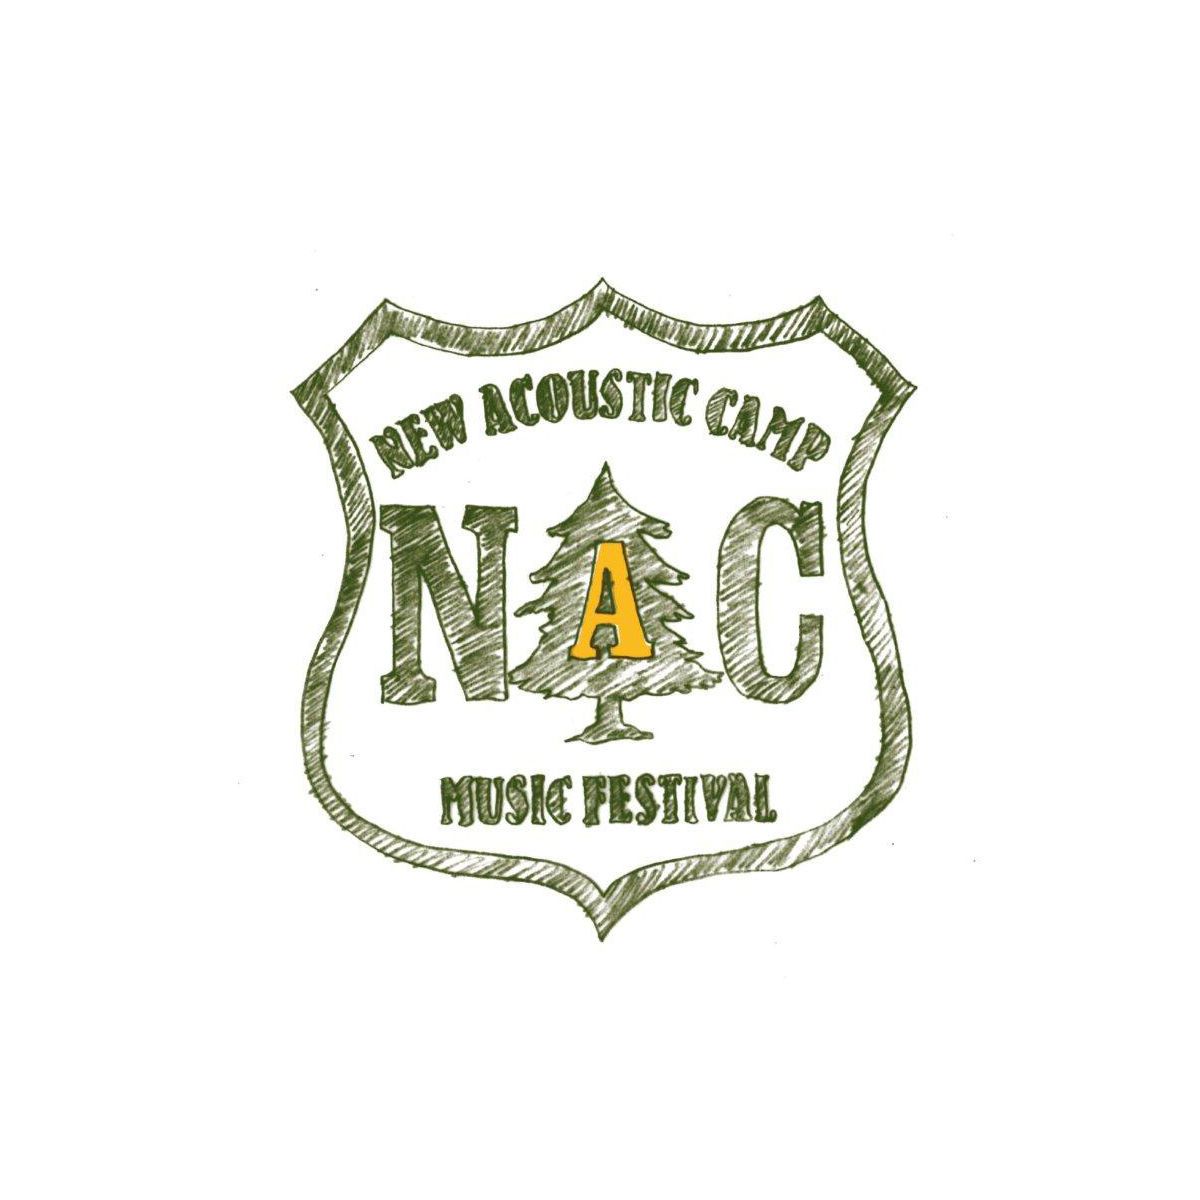 New Acoustic Camp 2014